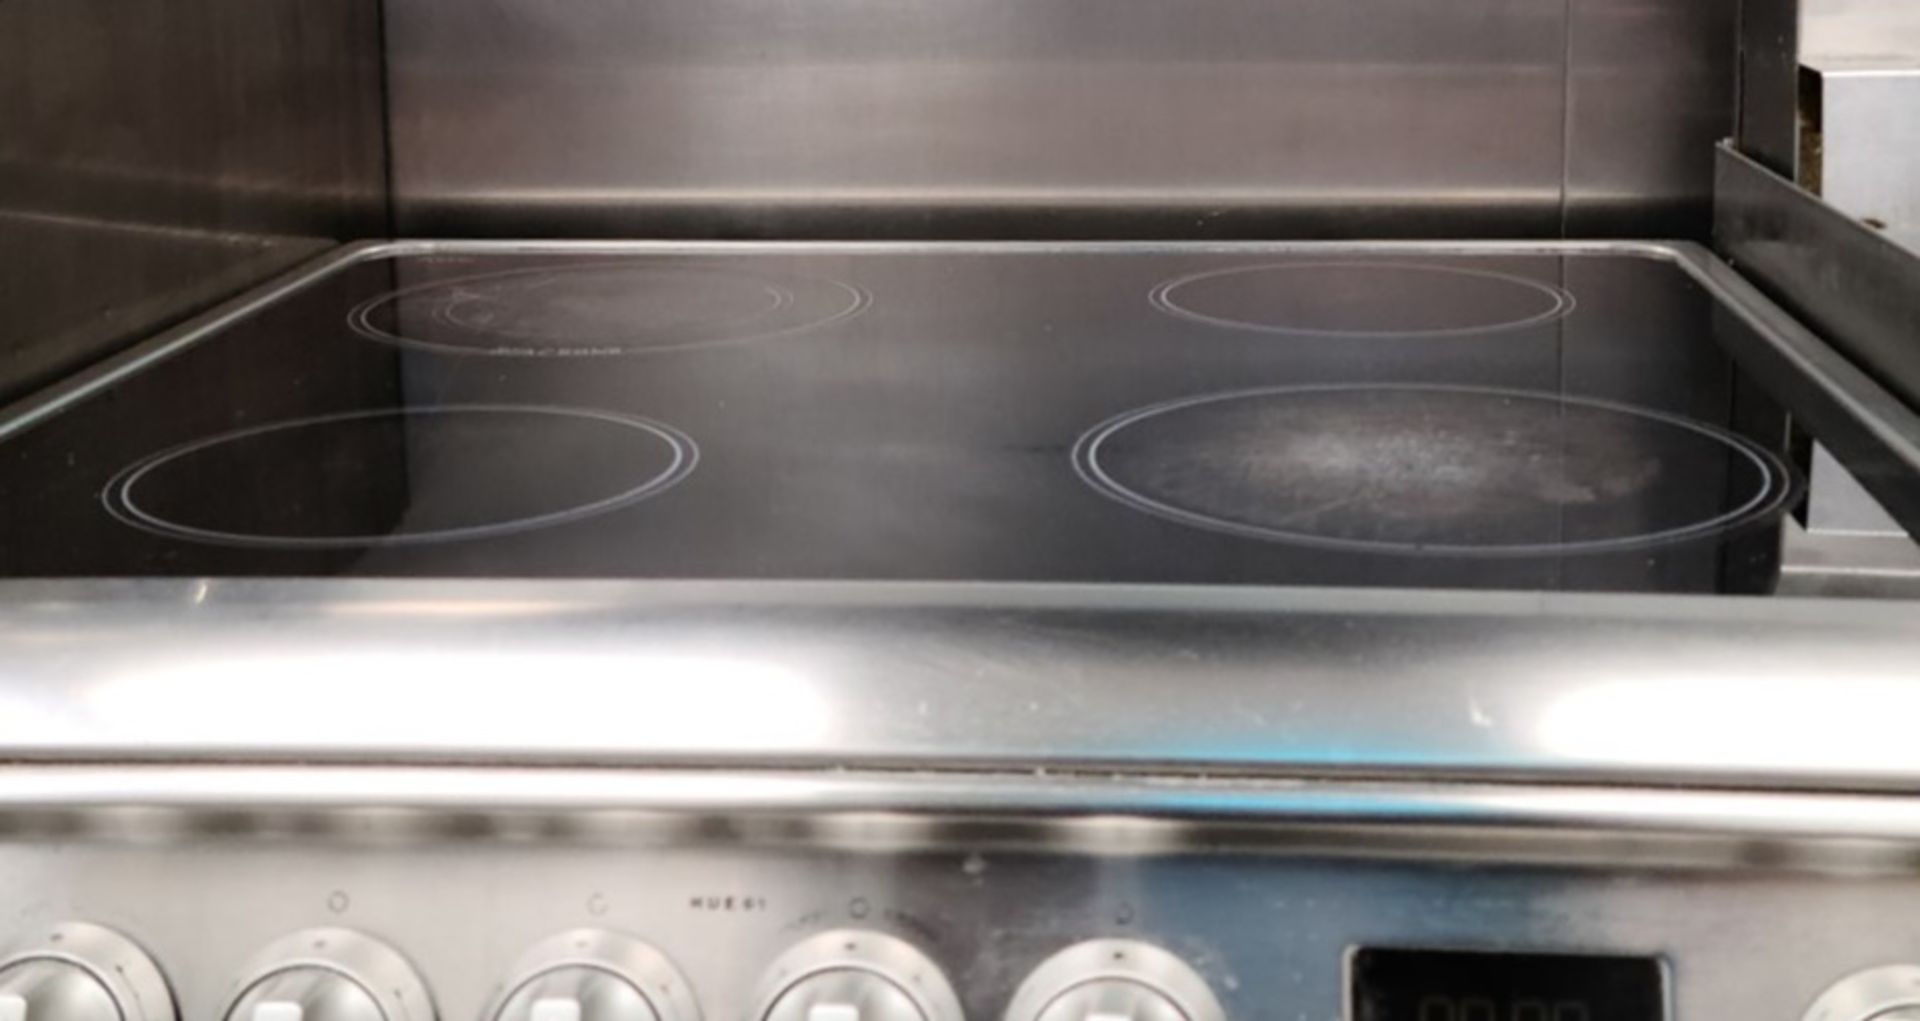 1 x Hotpoint HUI611X Electric Cooker With Double Oven, Four Burner Hob and Stainless Steel Finish - Image 3 of 9